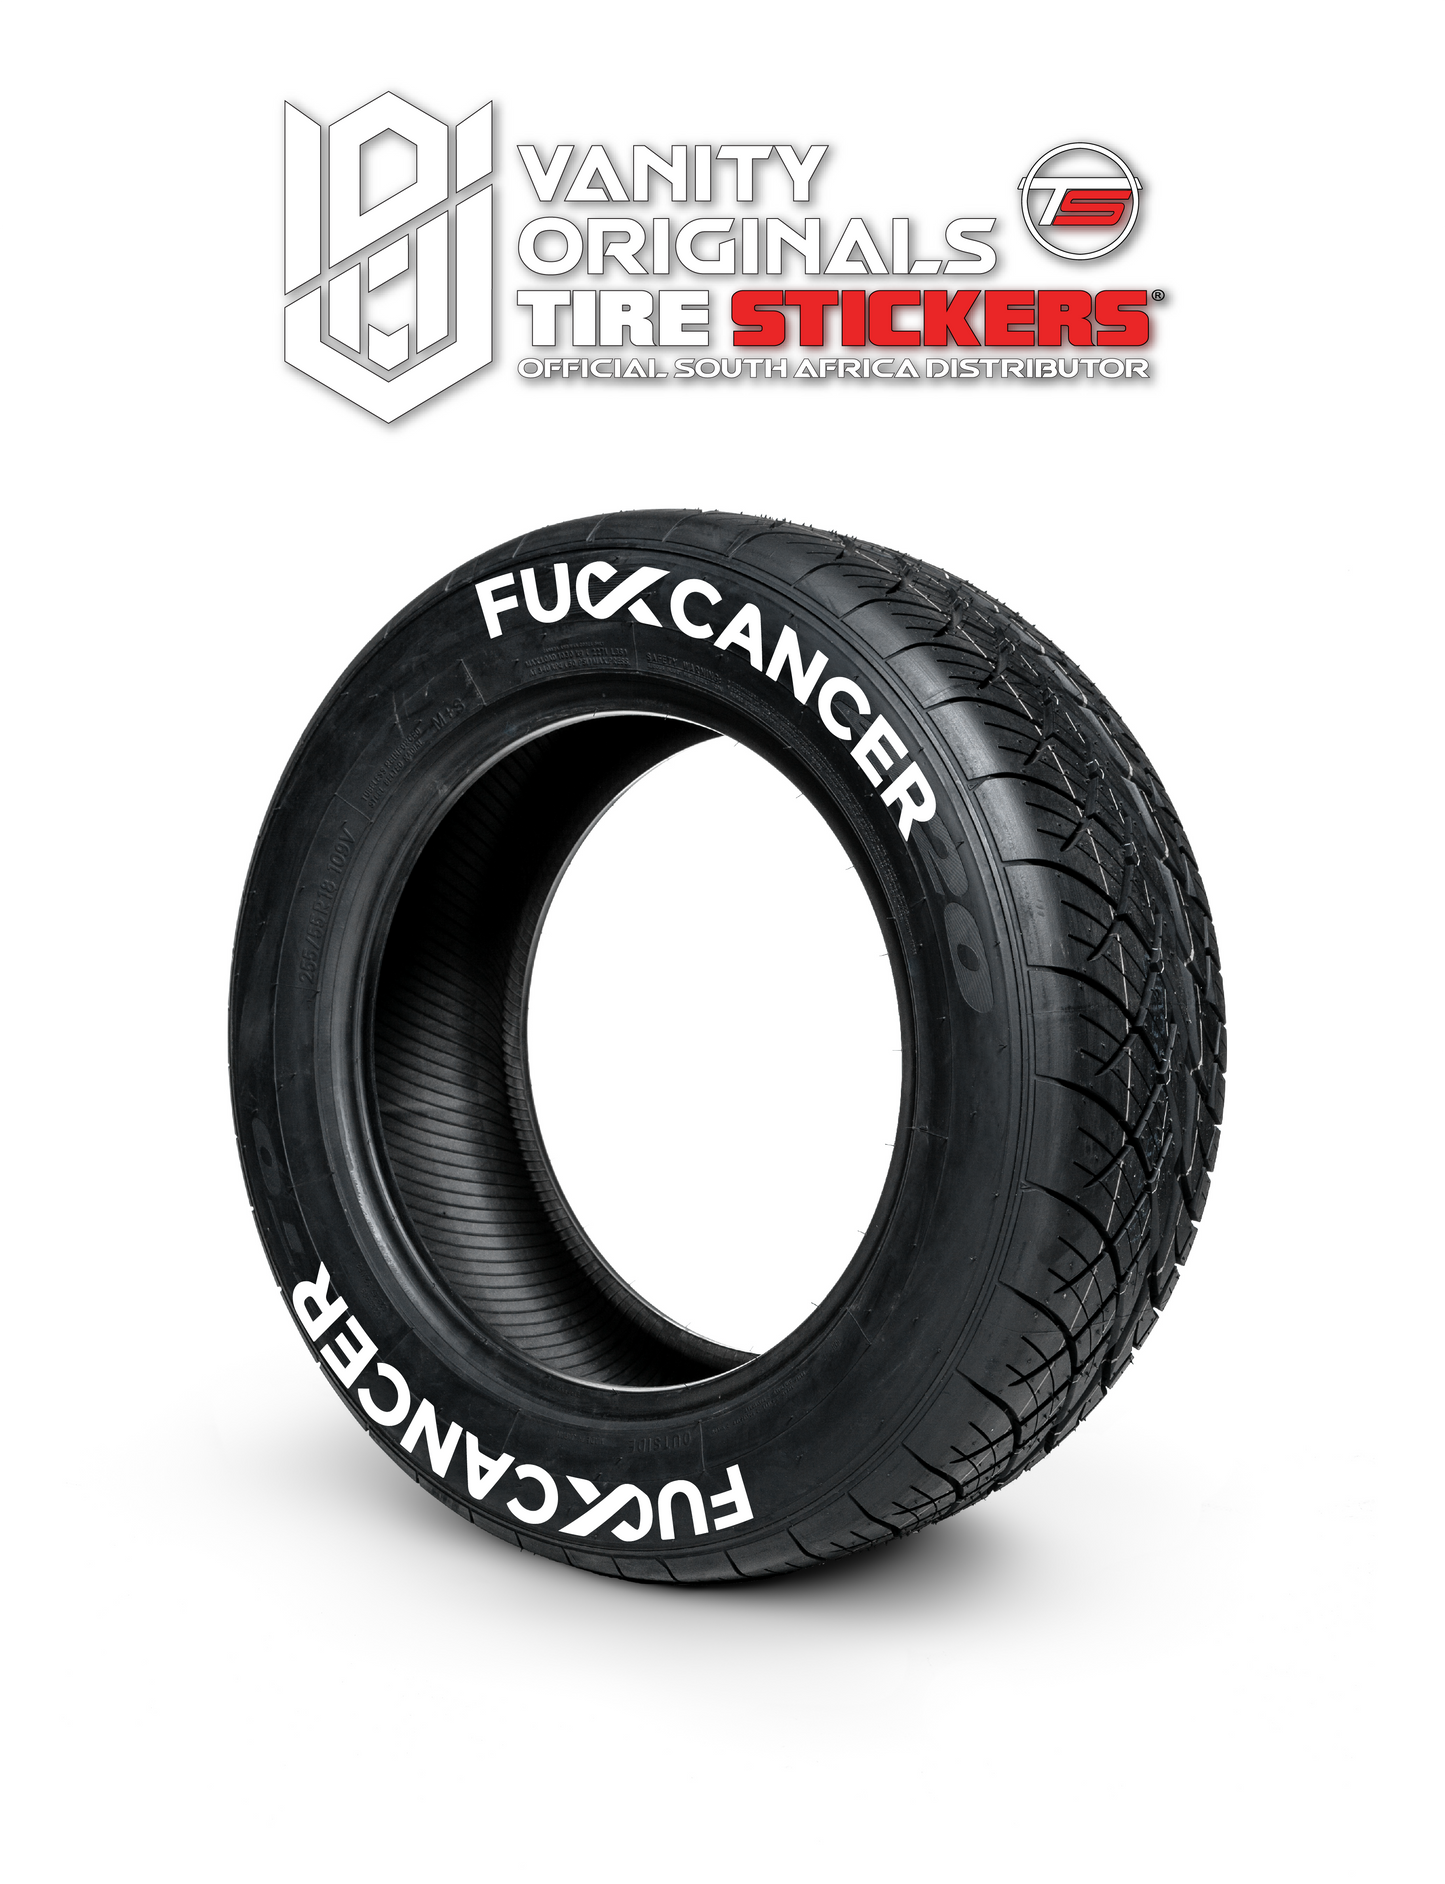 F-ck Cancer ( 8x Rubber Decals, Adhesive & Instructions Included )